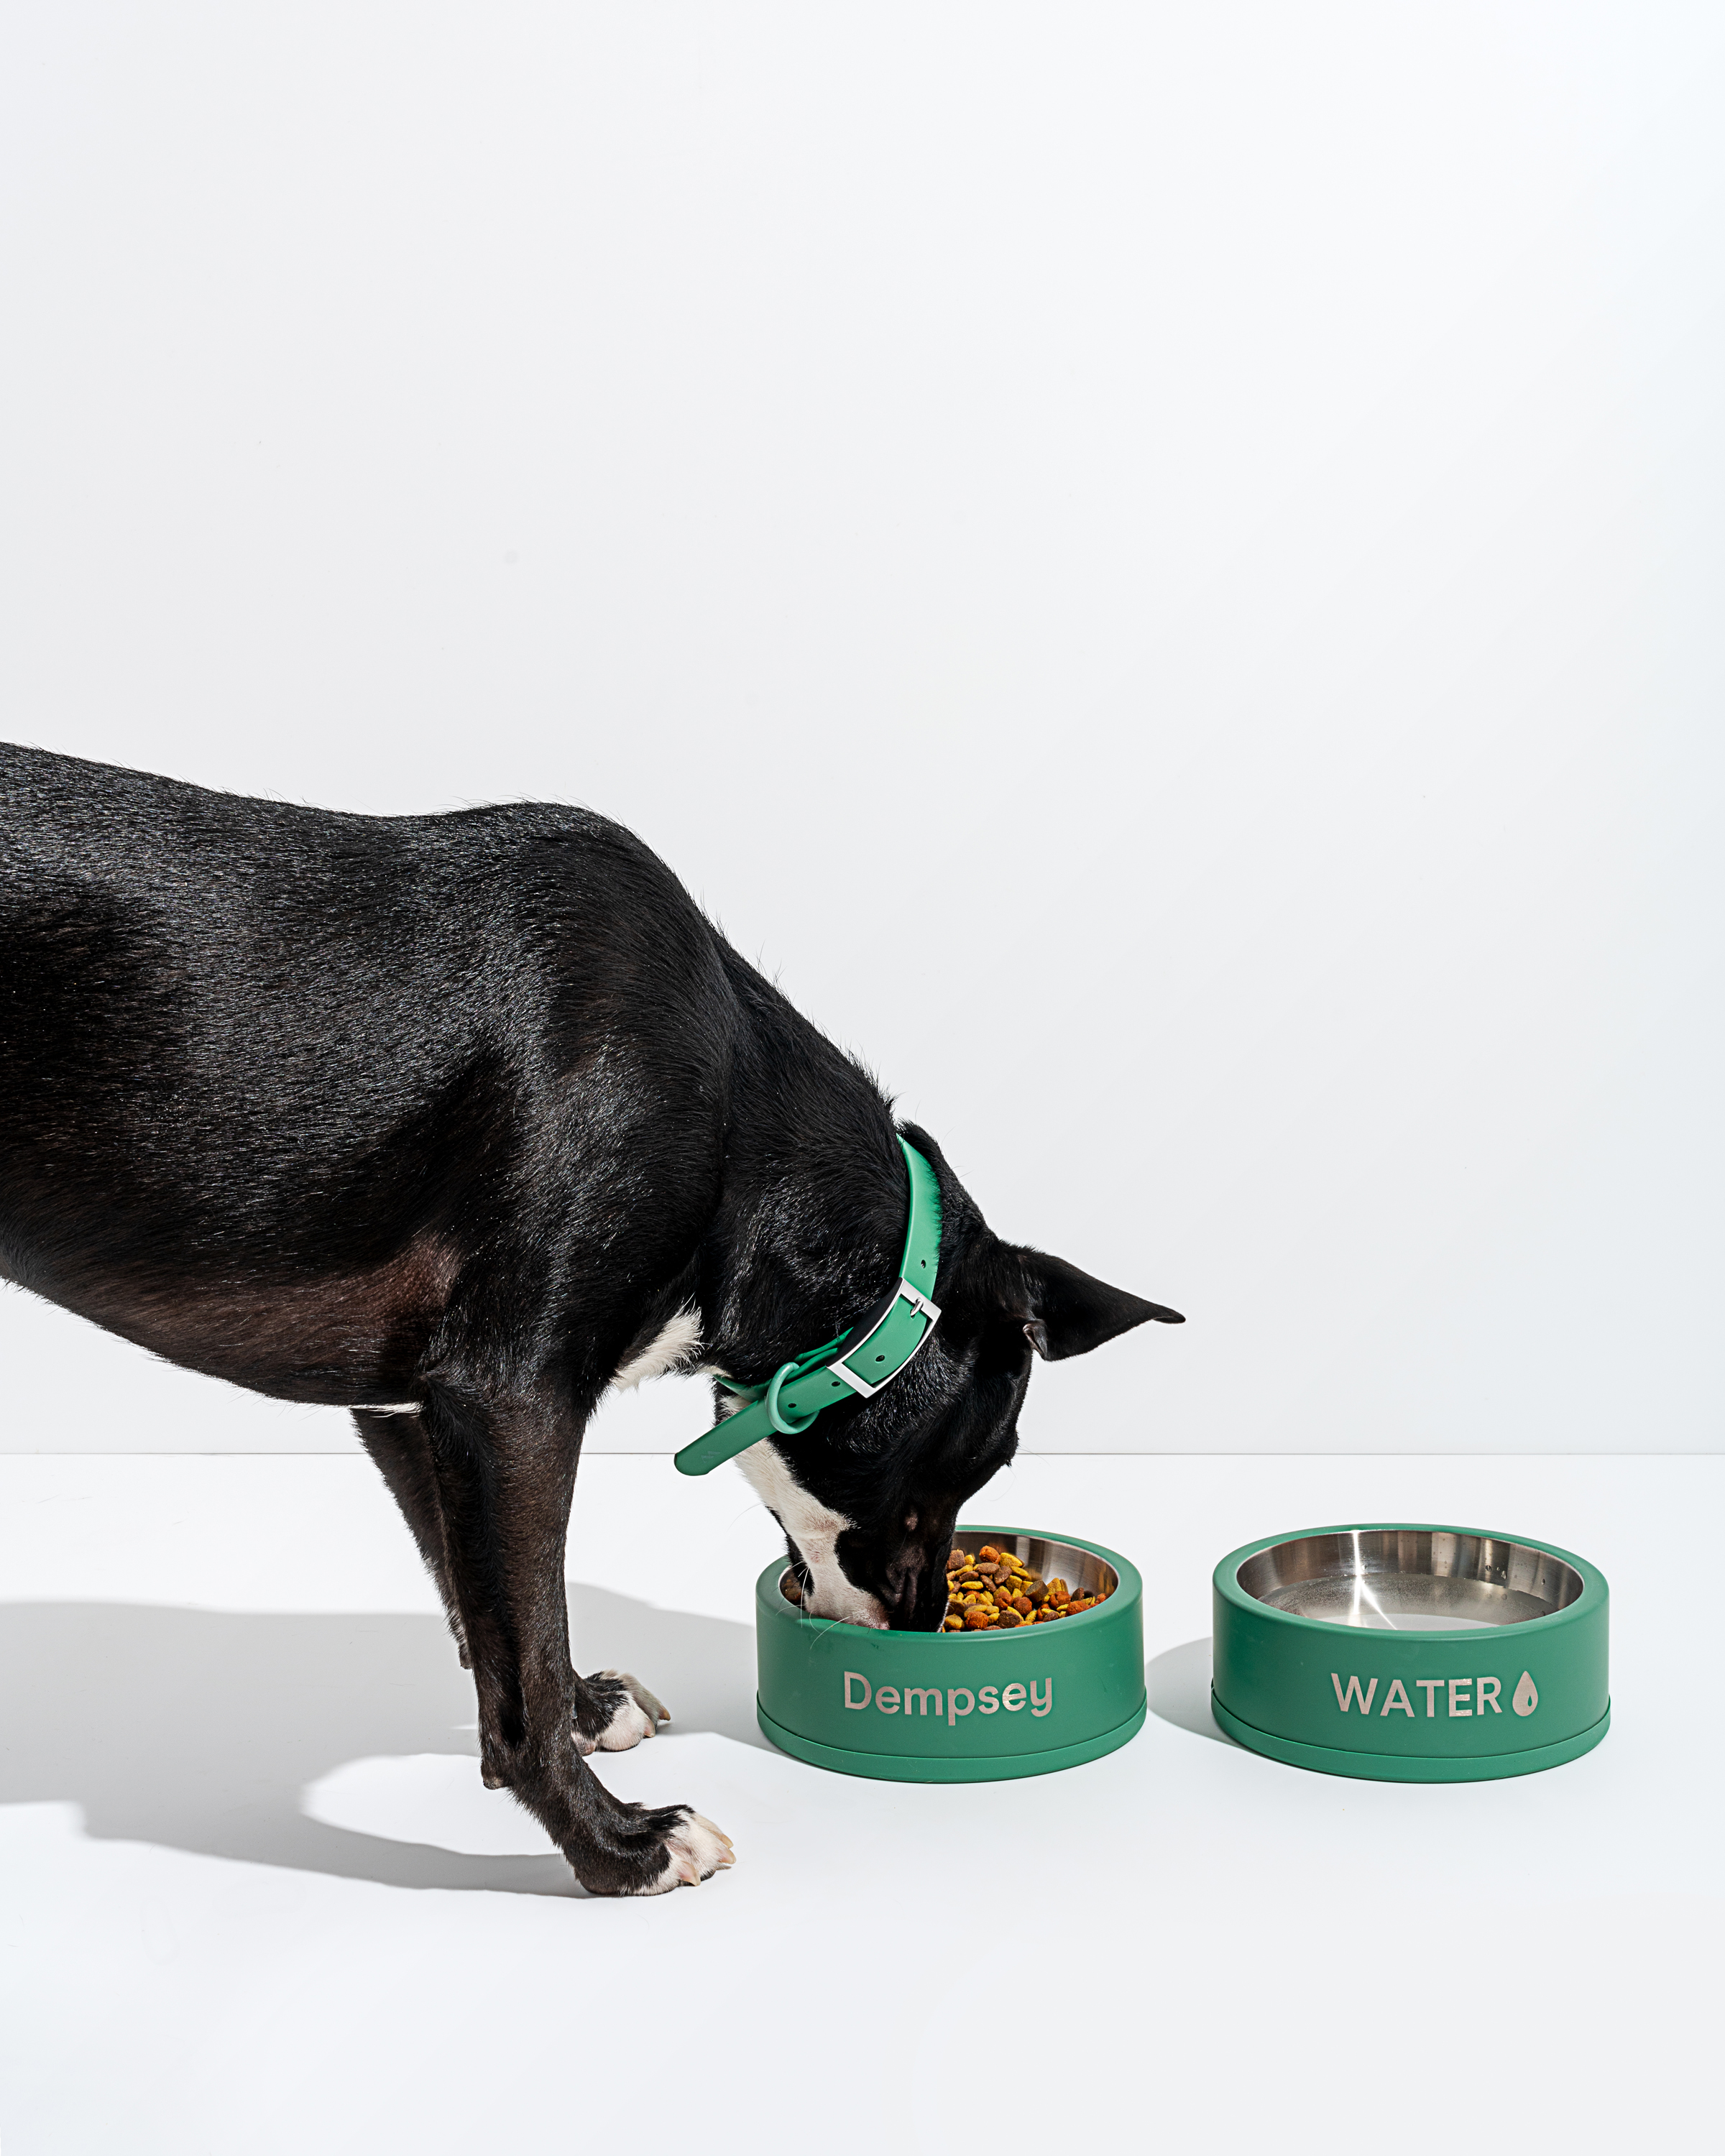 Dog eating out of a personalized set of bowls